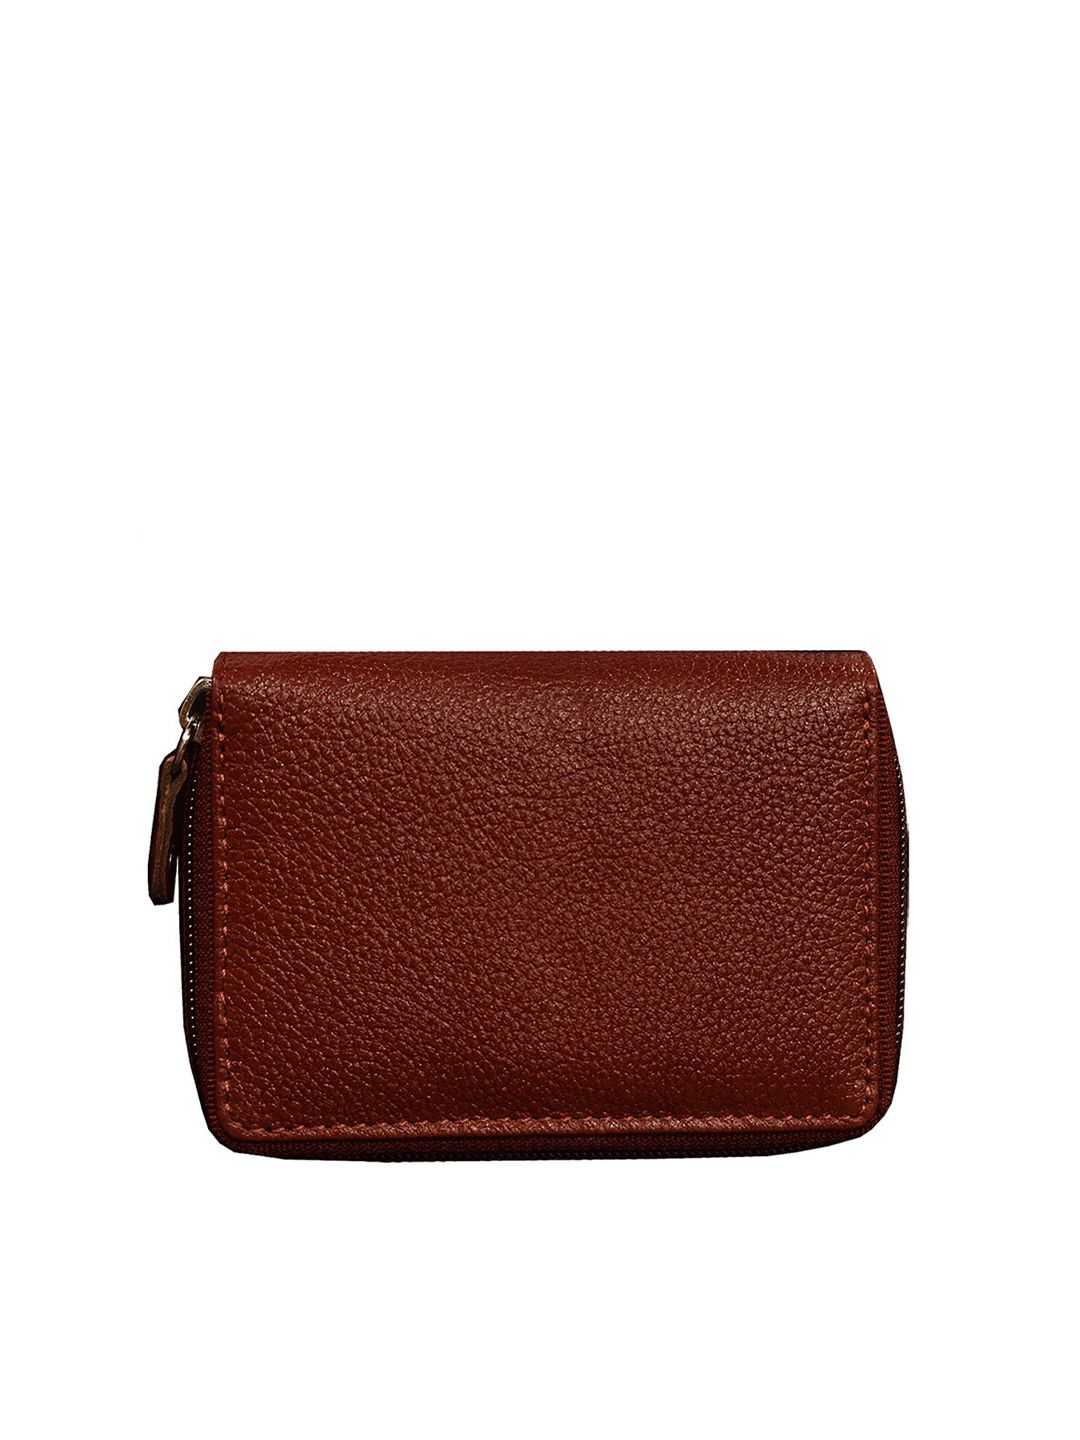 ABYS Unisex Brown Textured Leather Credit Card Holder Price in India